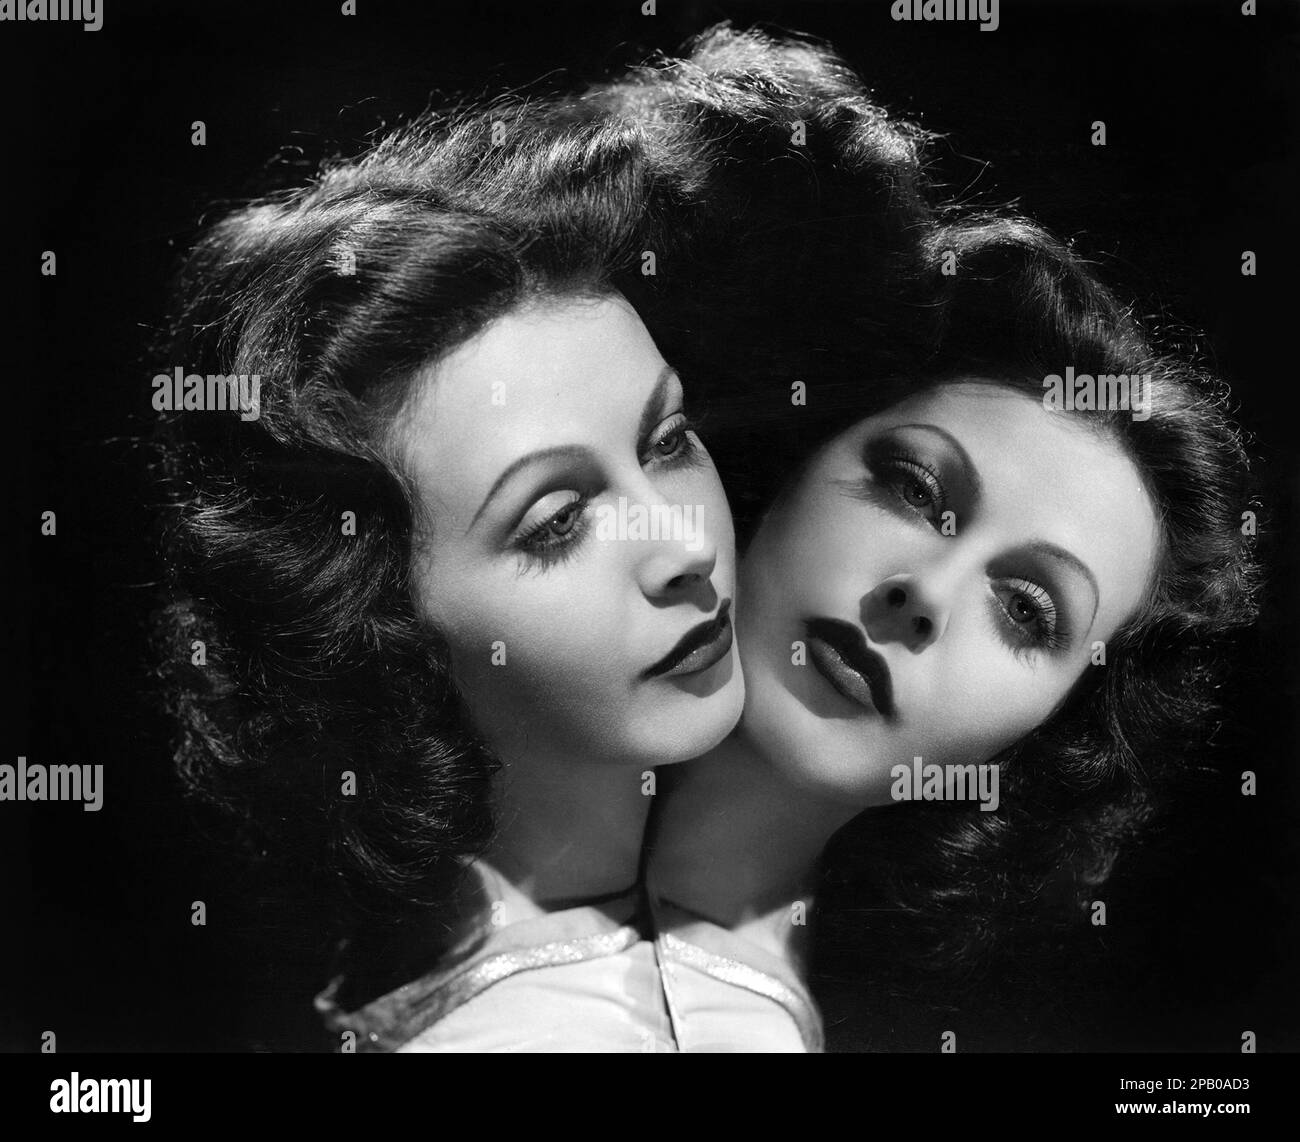 Hedy Lamarr in 'The Heavenly Body' by Laszlo Willinger (MGM, 1943). Keybook Portrait Stock Photo